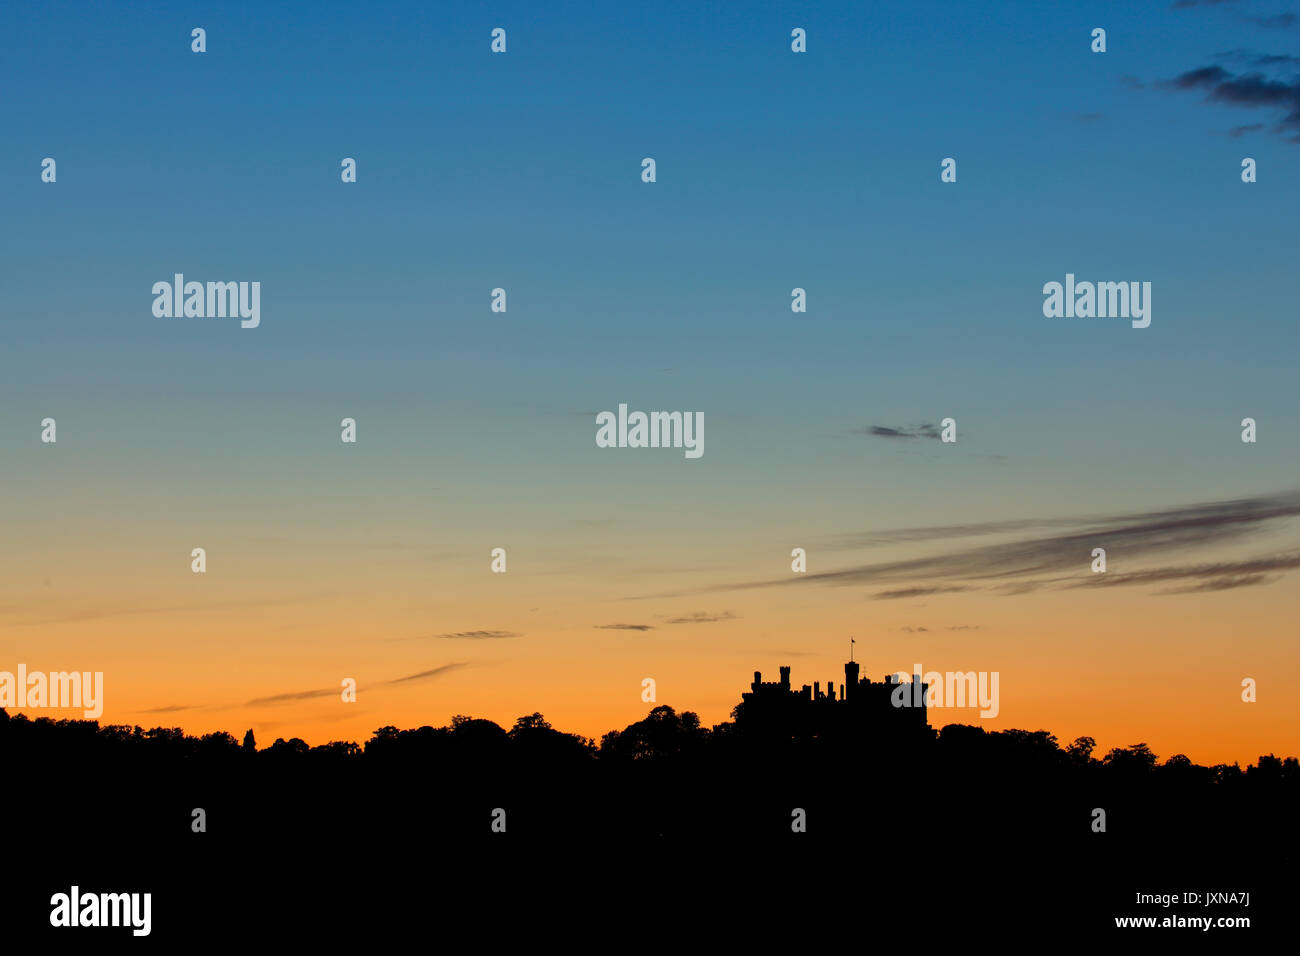 Belvoir Castle near Grantham Leicestershire silhouetted against a post sunset sky Stock Photo